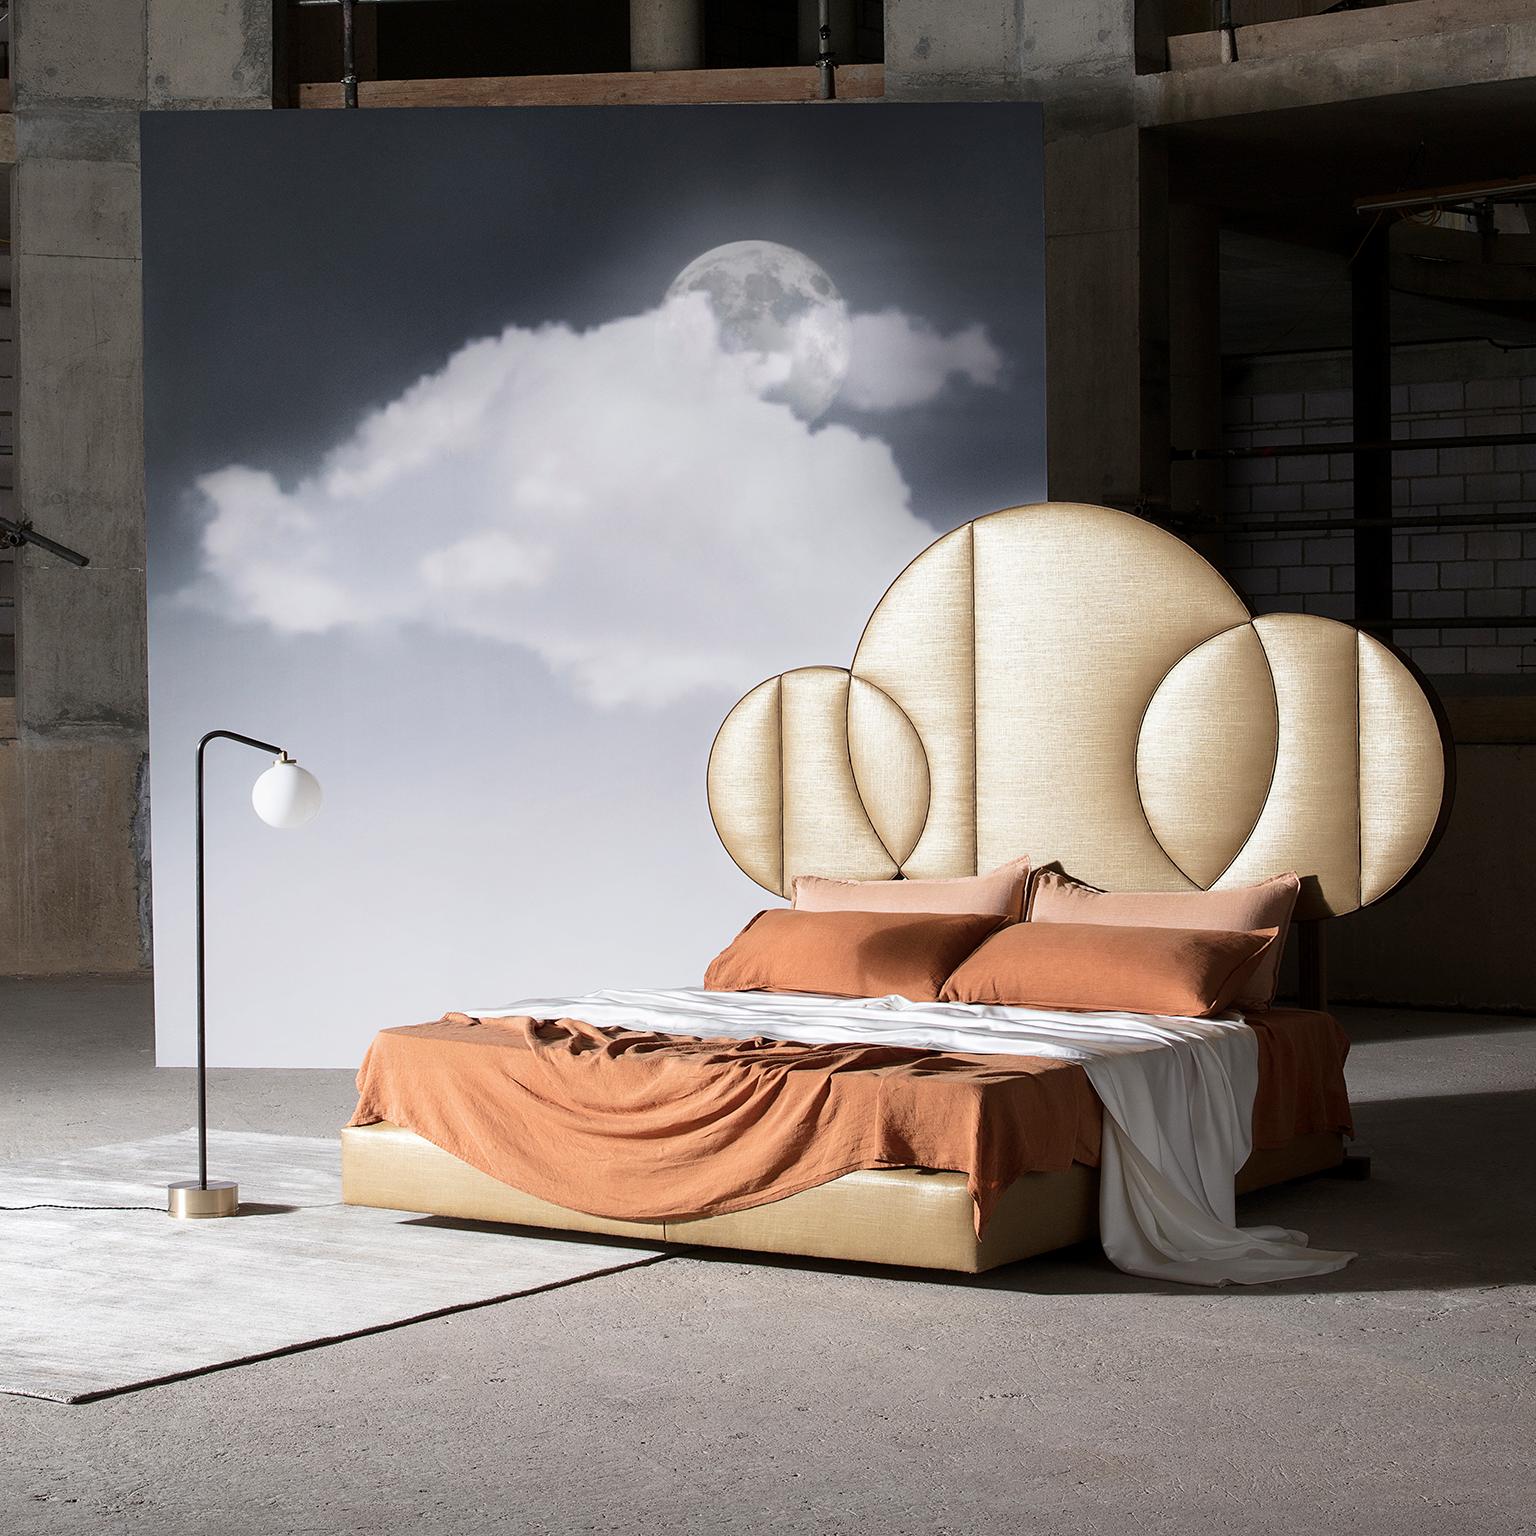 Developed in conjunction with Korean lifestyle designer, Teo Yang, the Savoir Moon bed is truly one of a kind. In East Asian folklore, the moon is thought to represent a symbol of luck and wealth. Teo’s design captures the movement of the moon, with